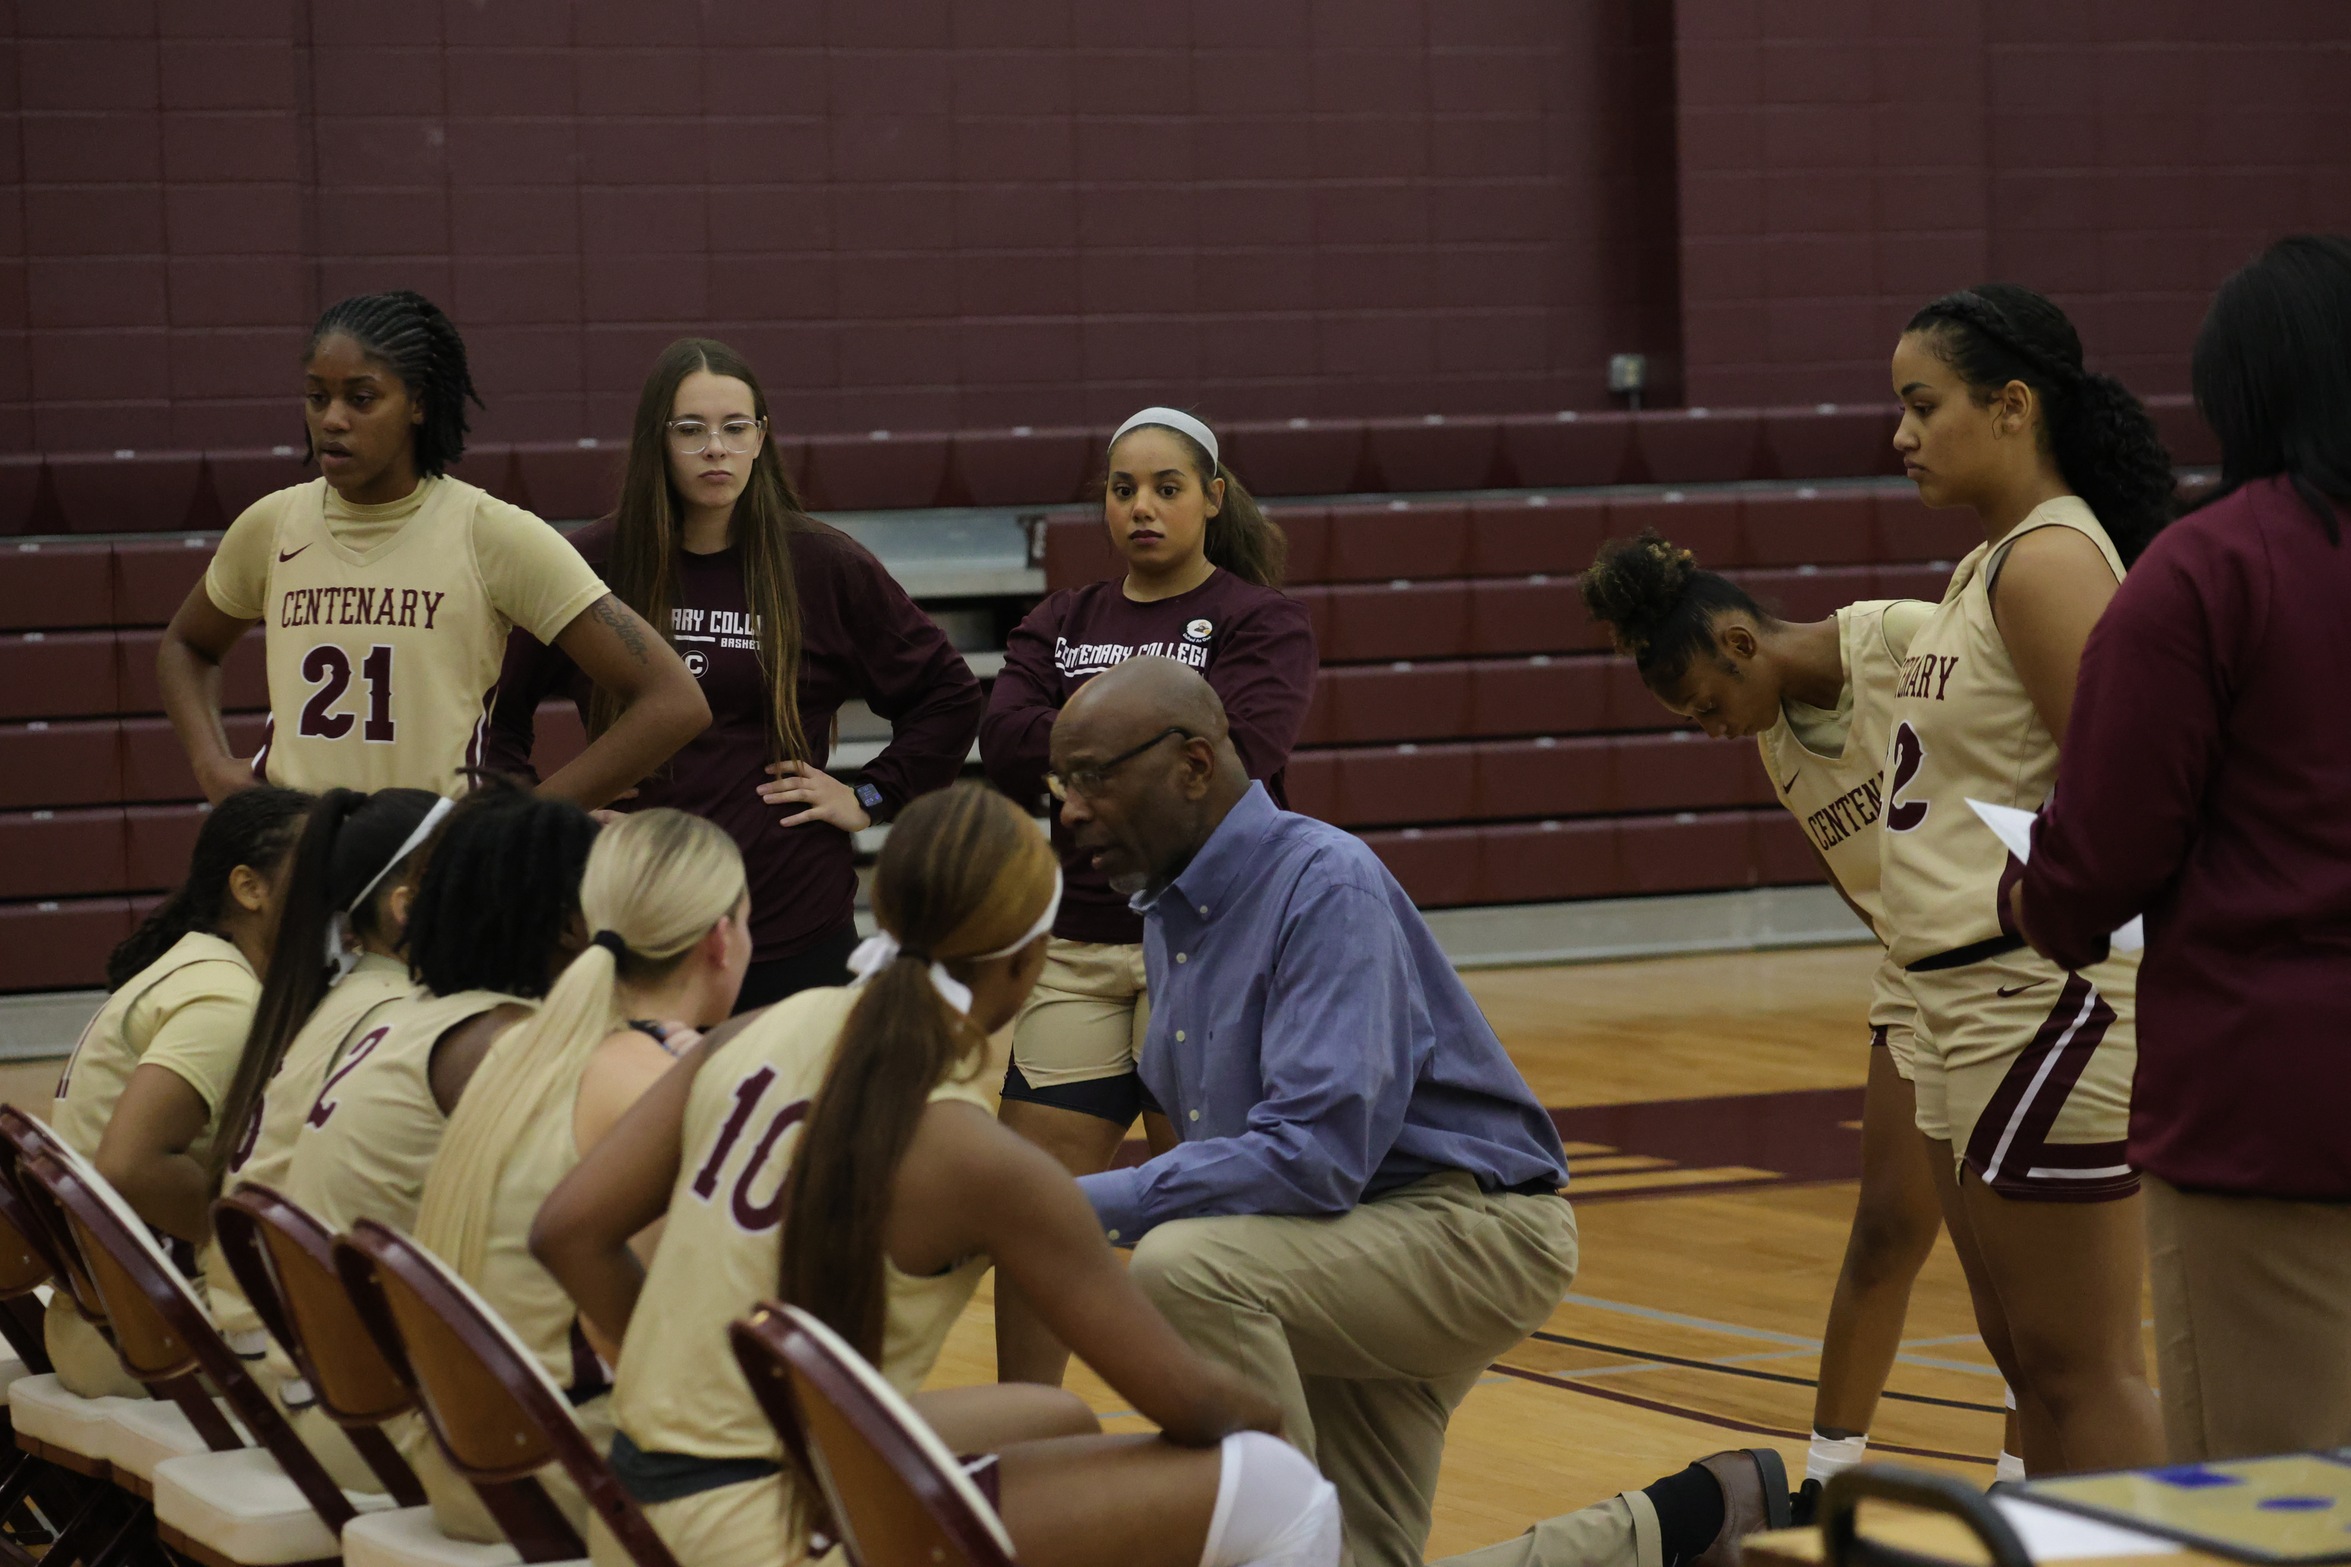 The Ladies fell at Austin College on Friday in their SCAC opener.